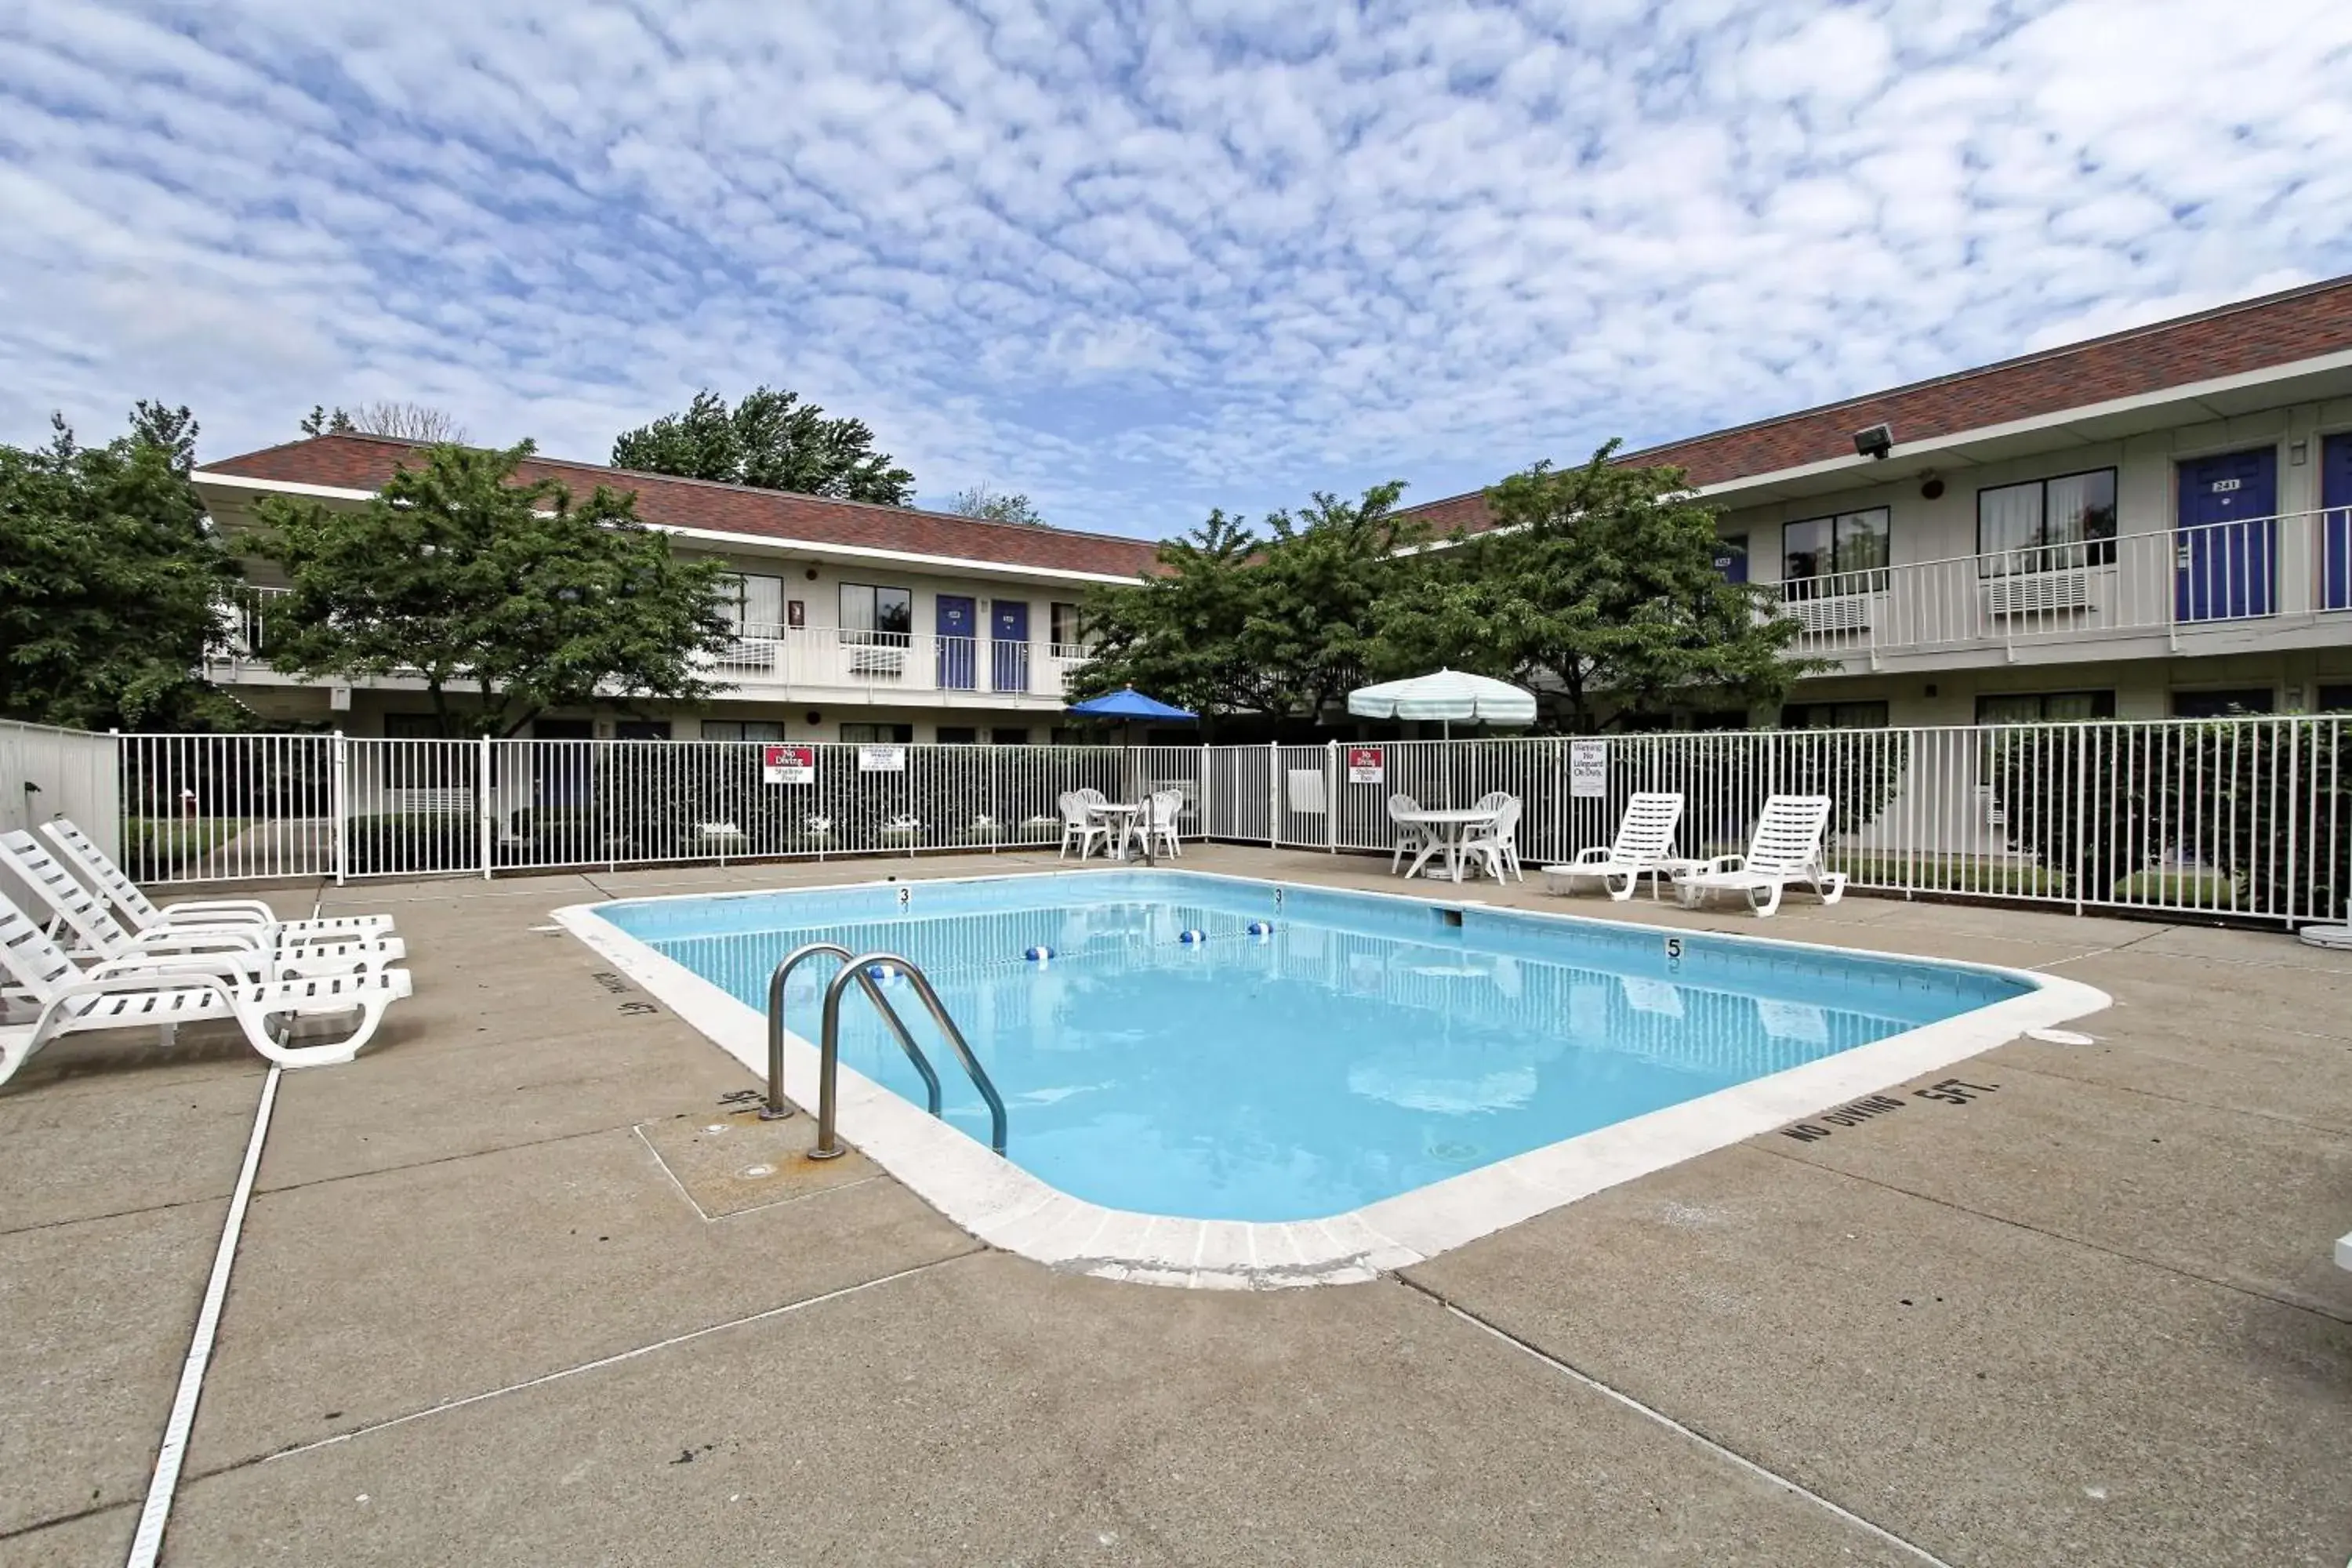 Day, Swimming Pool in Motel 6-Amherst, OH - Cleveland West - Lorain